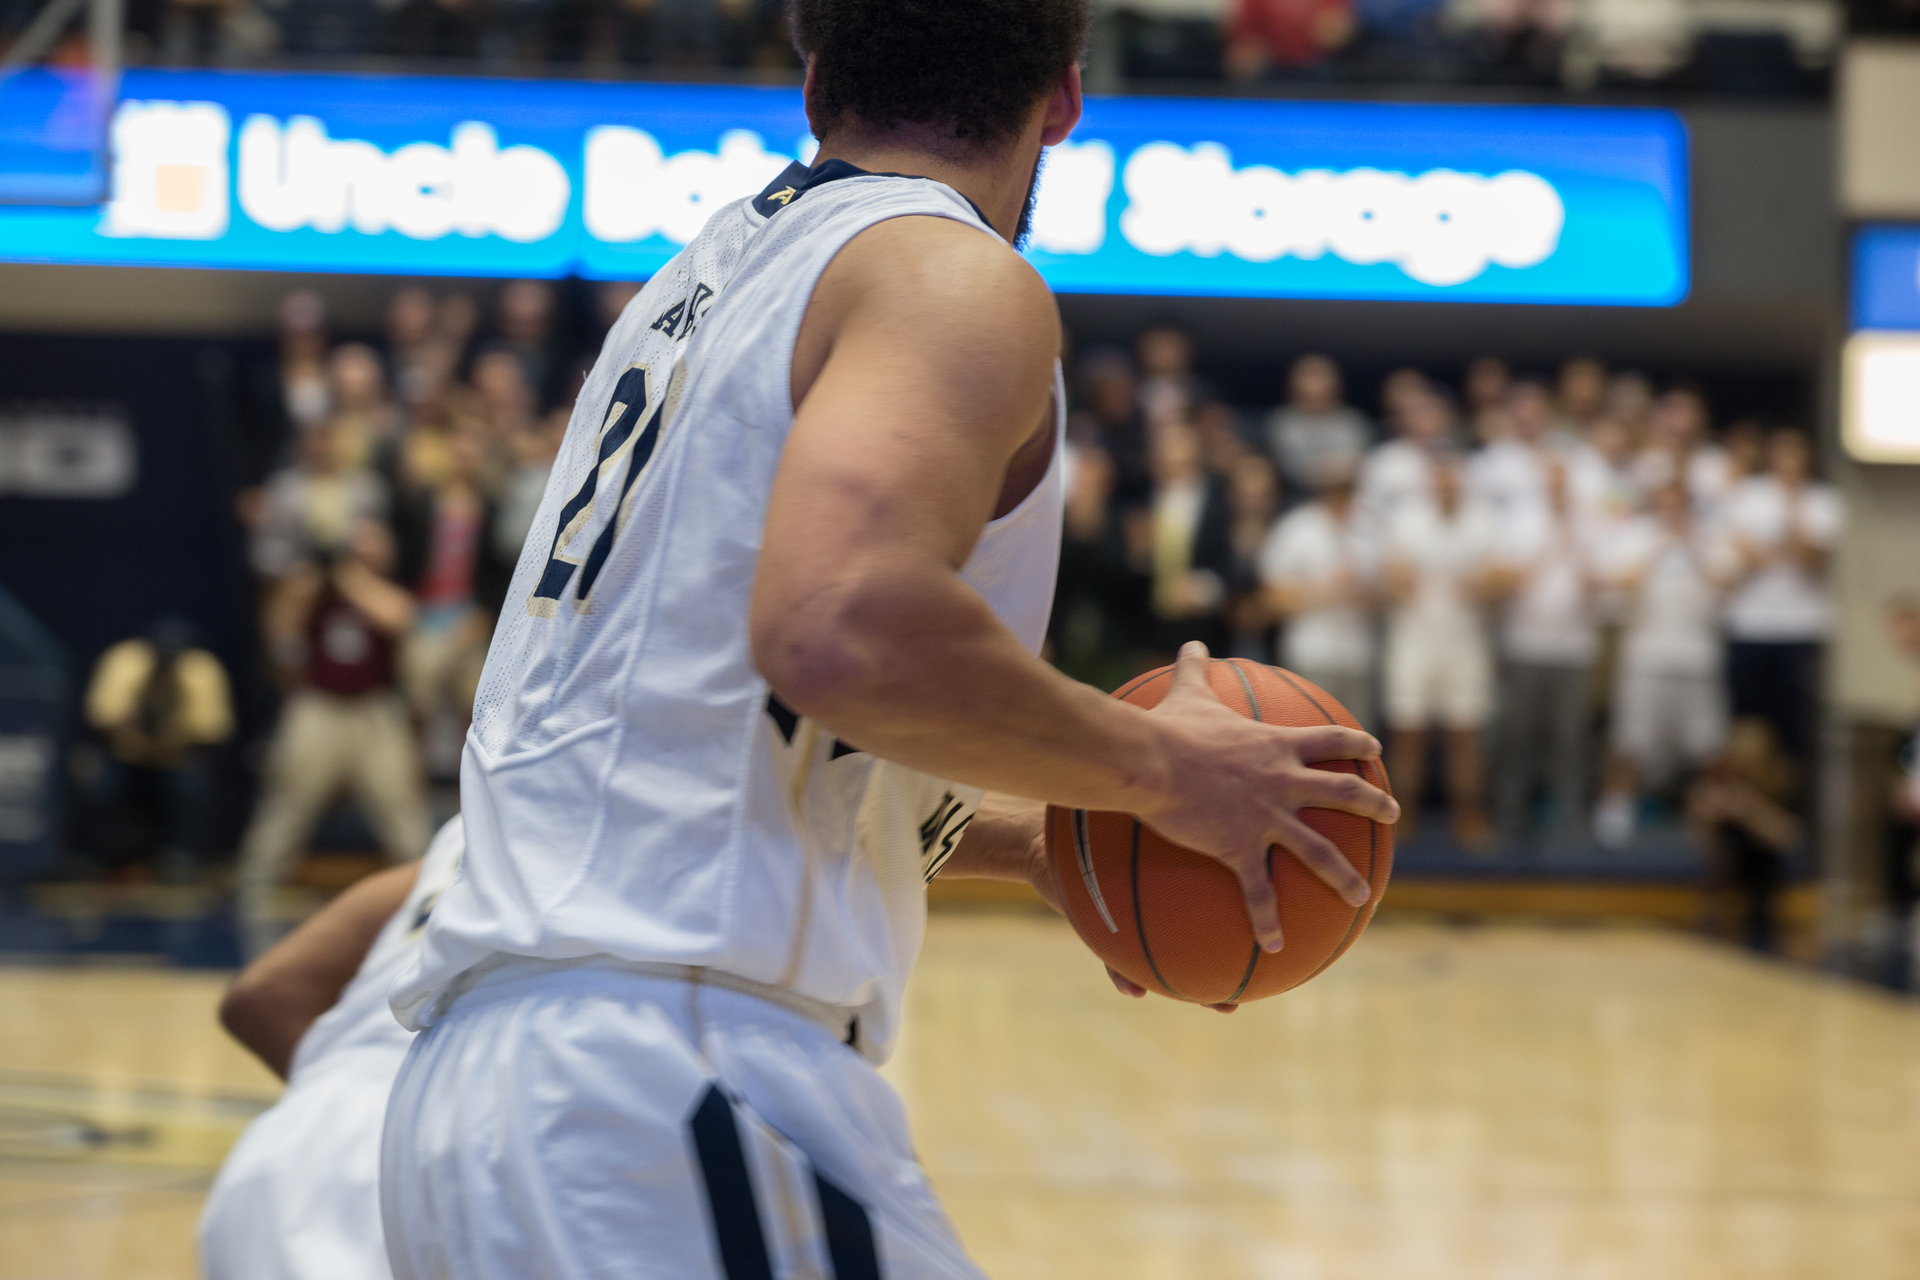 male basketball player on court holding ball